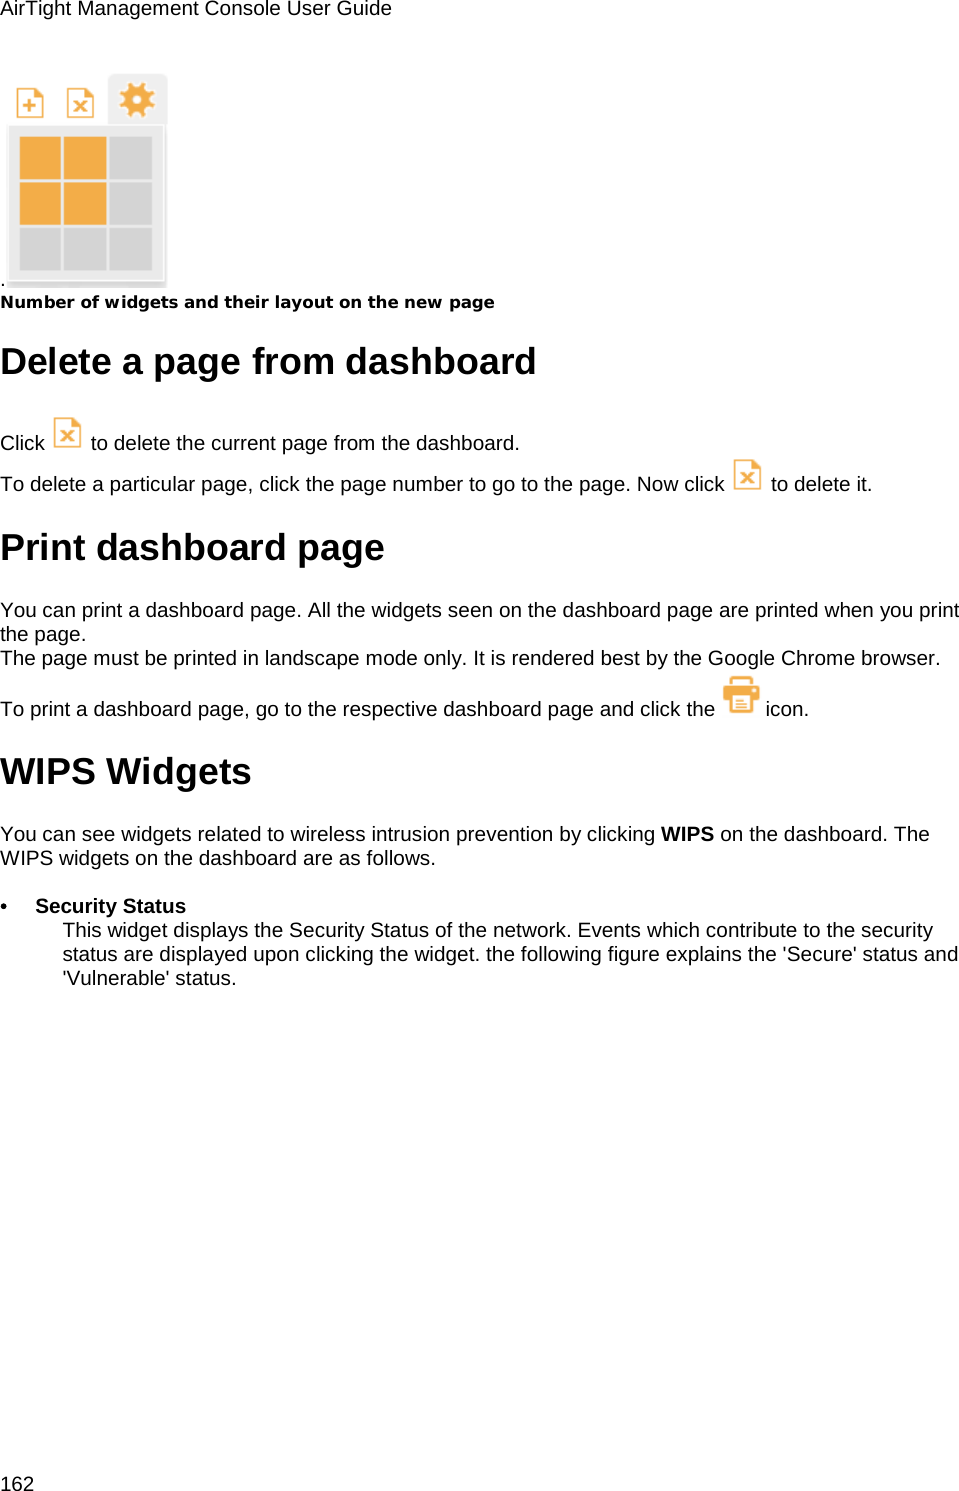 AirTight Management Console User Guide 162 .  Number of widgets and their layout on the new page Delete a page from dashboard Click   to delete the current page from the dashboard. To delete a particular page, click the page number to go to the page. Now click   to delete it. Print dashboard page You can print a dashboard page. All the widgets seen on the dashboard page are printed when you print the page. The page must be printed in landscape mode only. It is rendered best by the Google Chrome browser. To print a dashboard page, go to the respective dashboard page and click the  icon.  WIPS Widgets You can see widgets related to wireless intrusion prevention by clicking WIPS on the dashboard. The WIPS widgets on the dashboard are as follows.   •        Security Status  This widget displays the Security Status of the network. Events which contribute to the security status are displayed upon clicking the widget. the following figure explains the &apos;Secure&apos; status and &apos;Vulnerable&apos; status. 